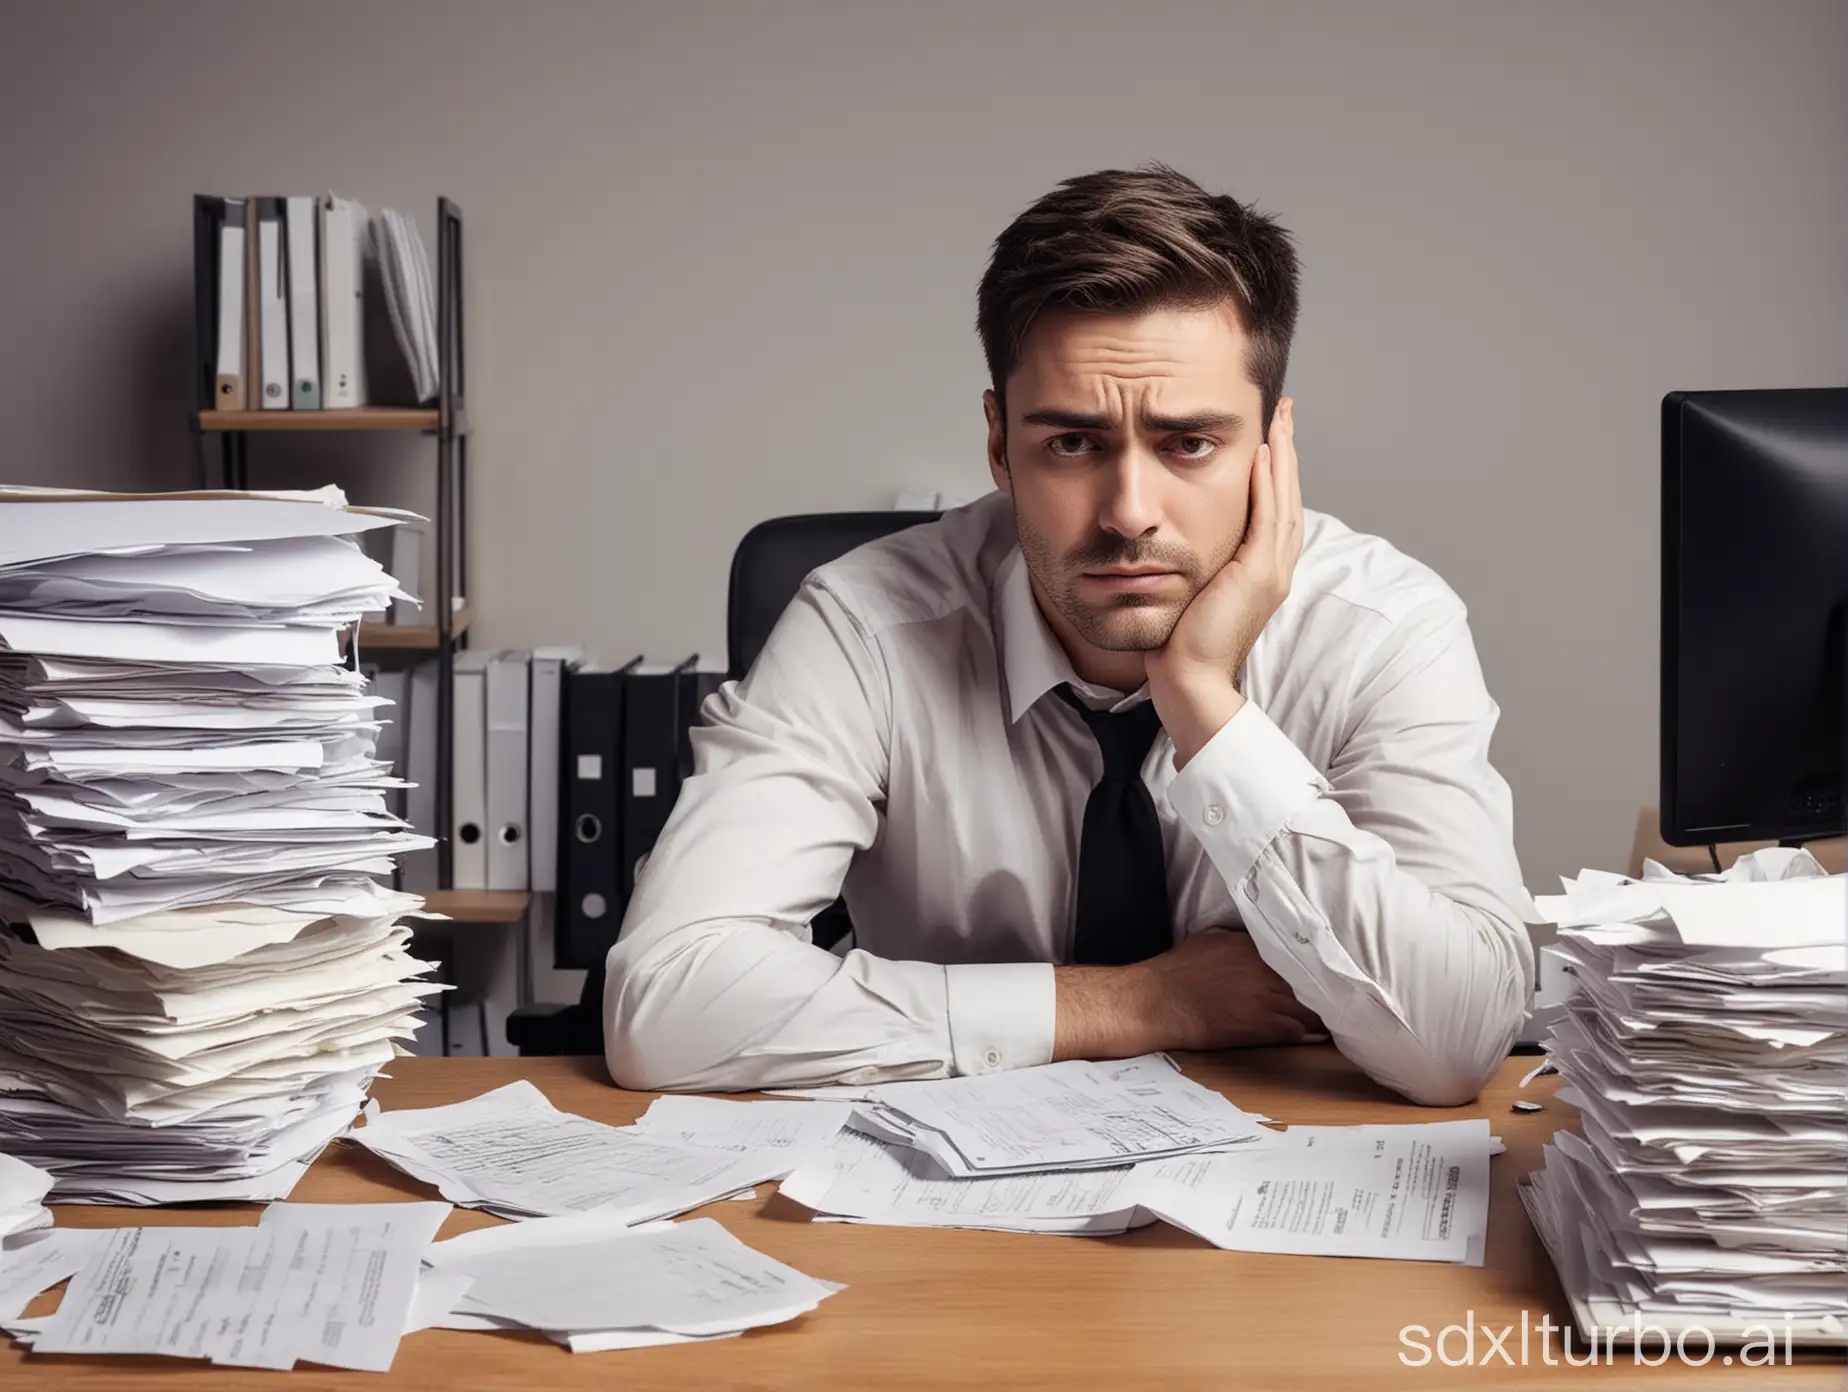 Please generate an image of a man at work who looks extremely tired. He should have dark circles under his eyes, a slouched posture, and a weary expression on his face. The background should show an office environment with a desk cluttered with papers and a computer. Half closed eyes